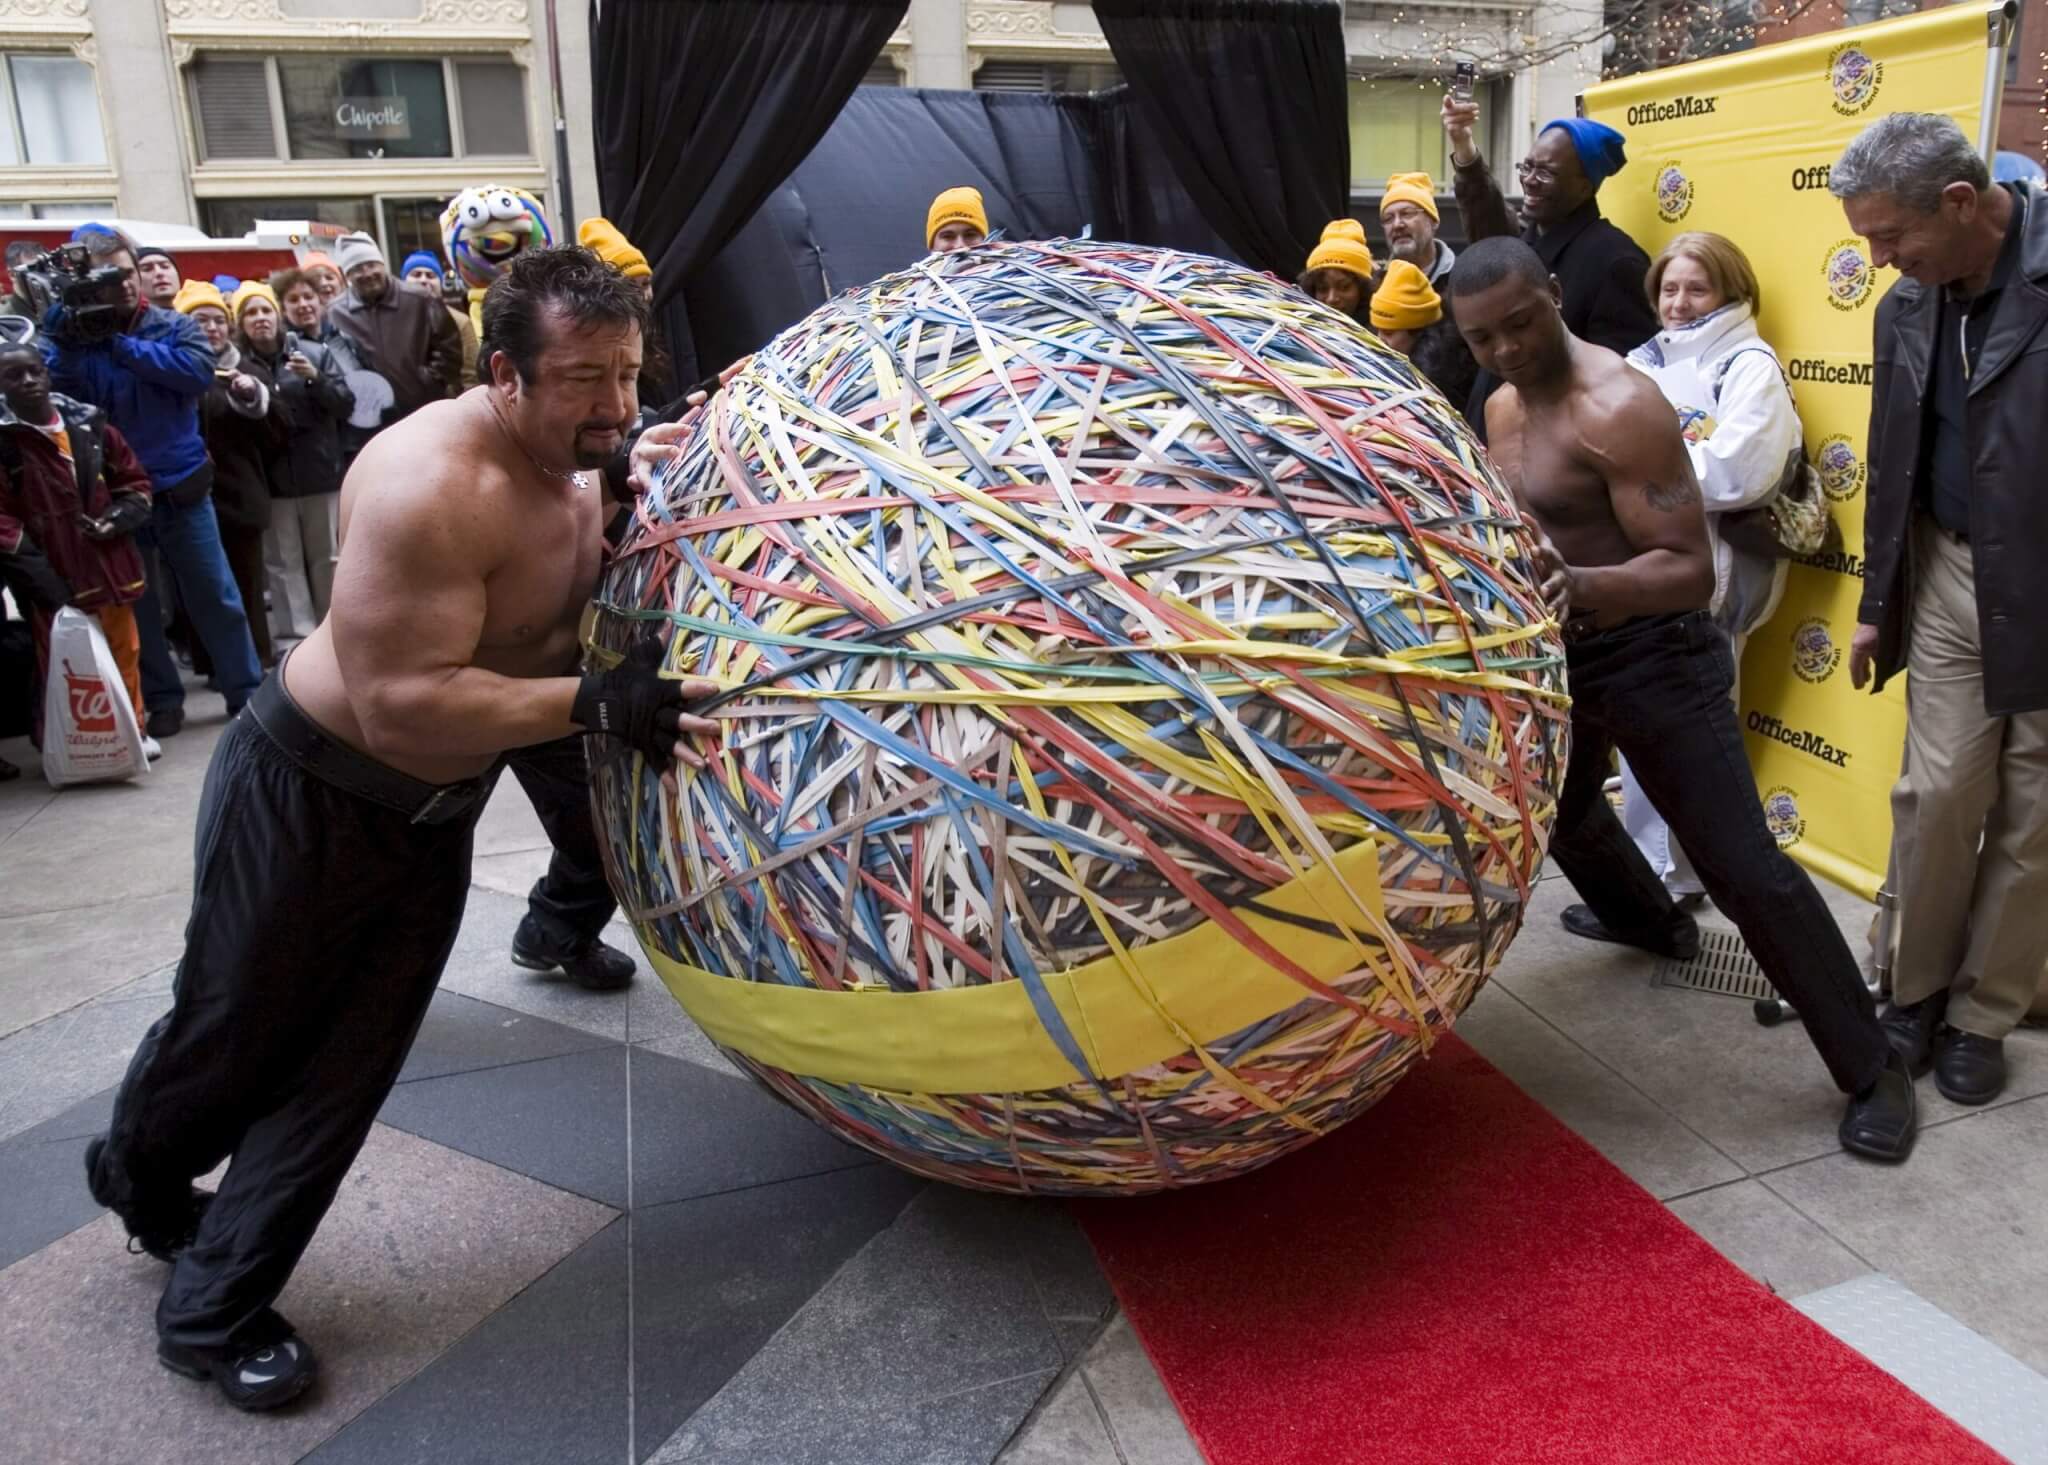 Musclemen Move What is Being Claimed As the 'World's Largest Rubber Band Ball' to the Scales at Its Official Guinness World Record Weigh-in in Downtown Chicago Illinois Tuesday 21 November 2006 the Ball Contains 175 000 Individual Rubber Bands Stands Five Feet Six Inches Tall and Has a Circumference of 19 Feet Creator Steve Milton Started the 4594 Pound Ball in His Eugene Oregon Home in November 2005 the Previous Record For a Rubber Band Ball is 3 120 Pounds